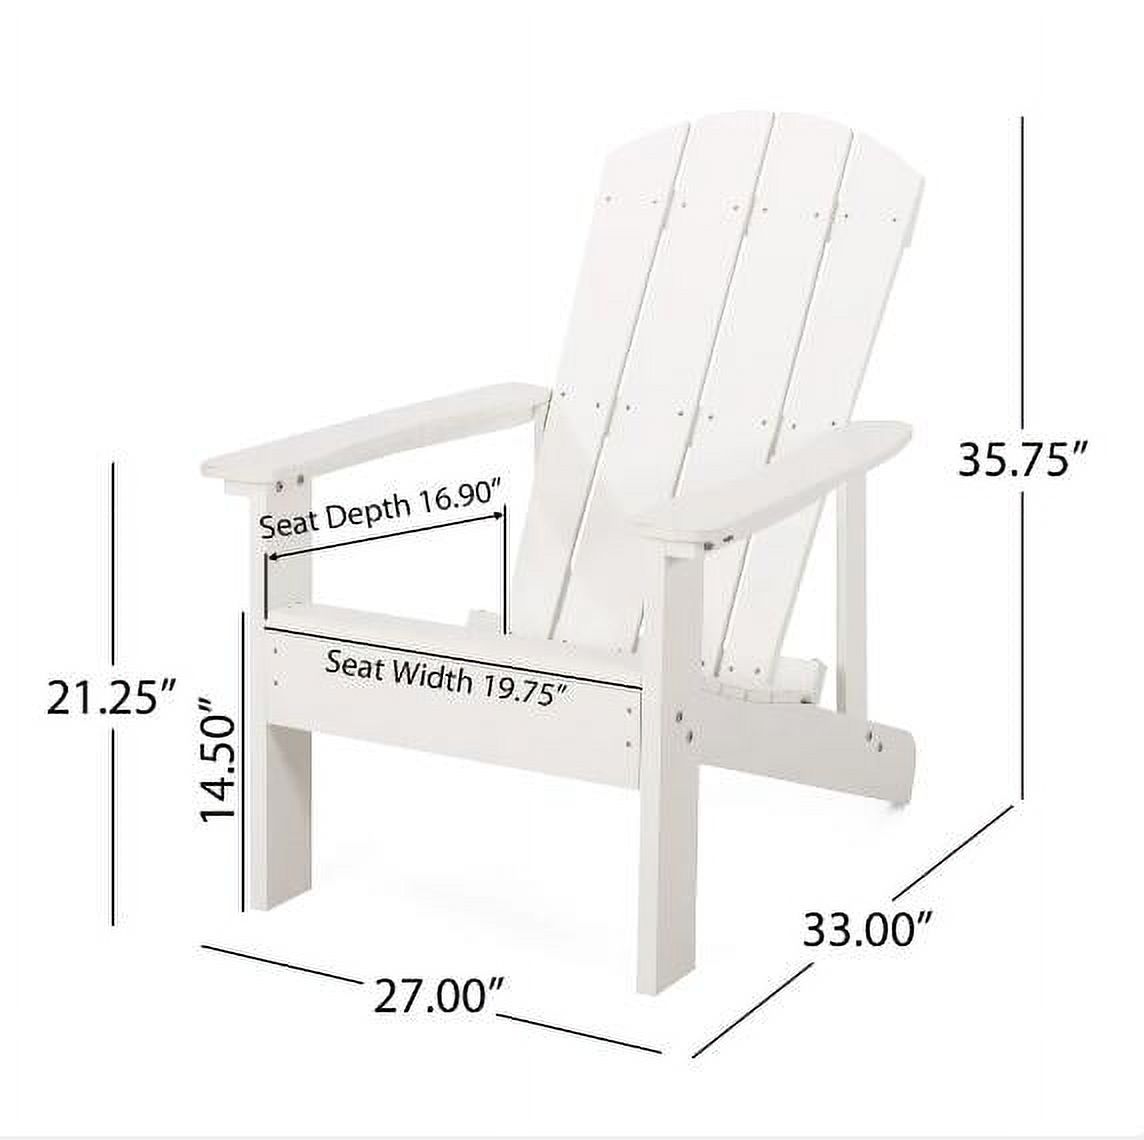 LANTRO JS Classic Pure White Outdoor Solid Wood Adirondack Chair Garden Lounge Chair - image 3 of 7